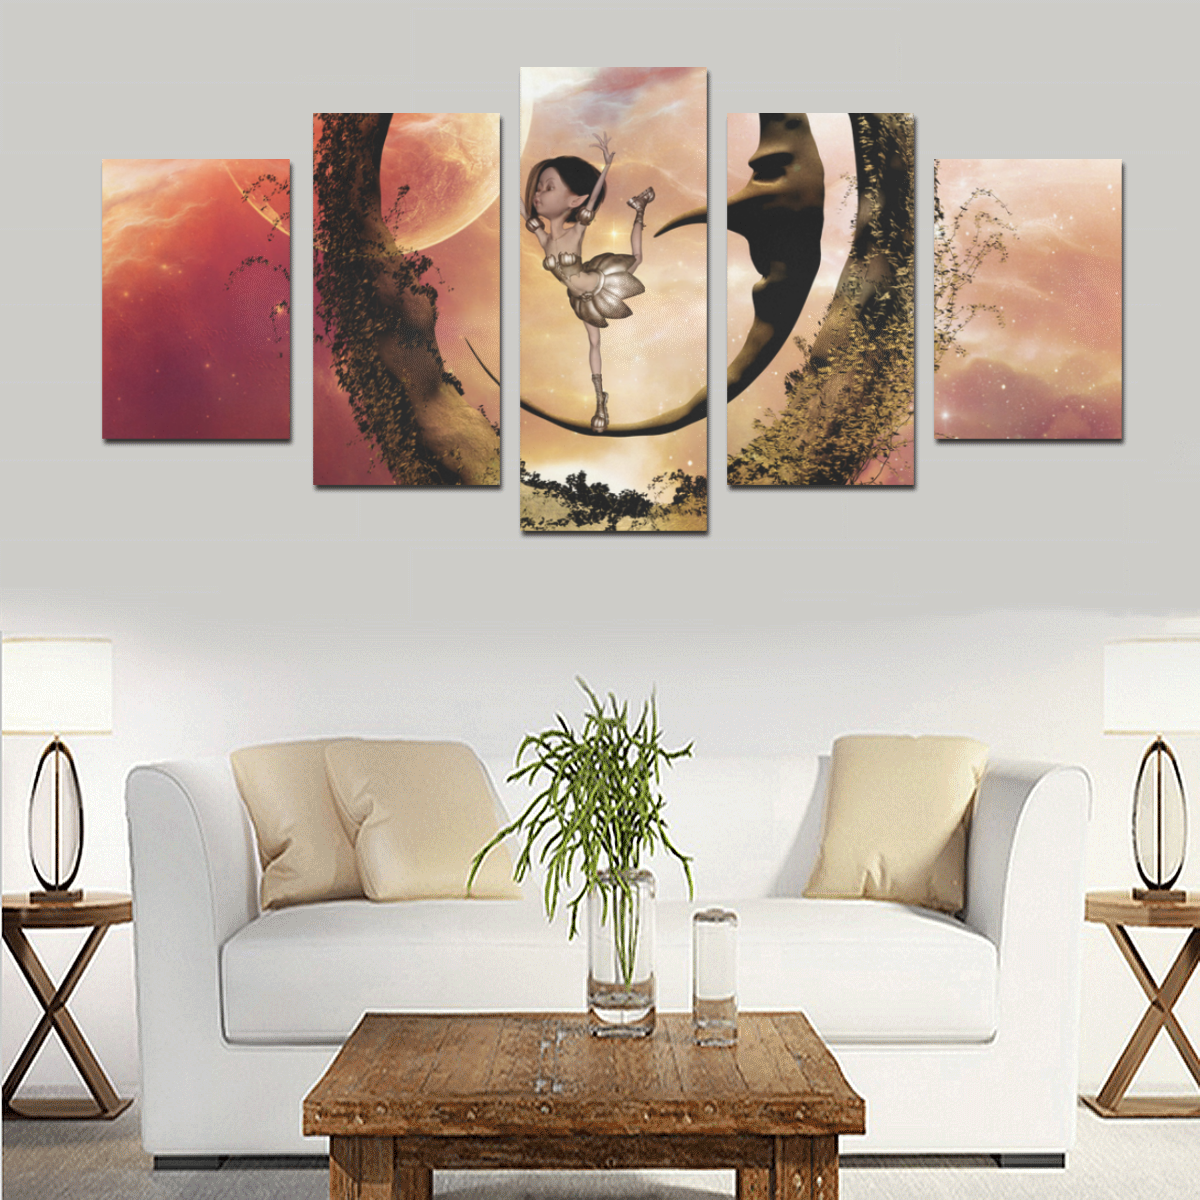 Dancing on the moon Canvas Print Sets D (No Frame)